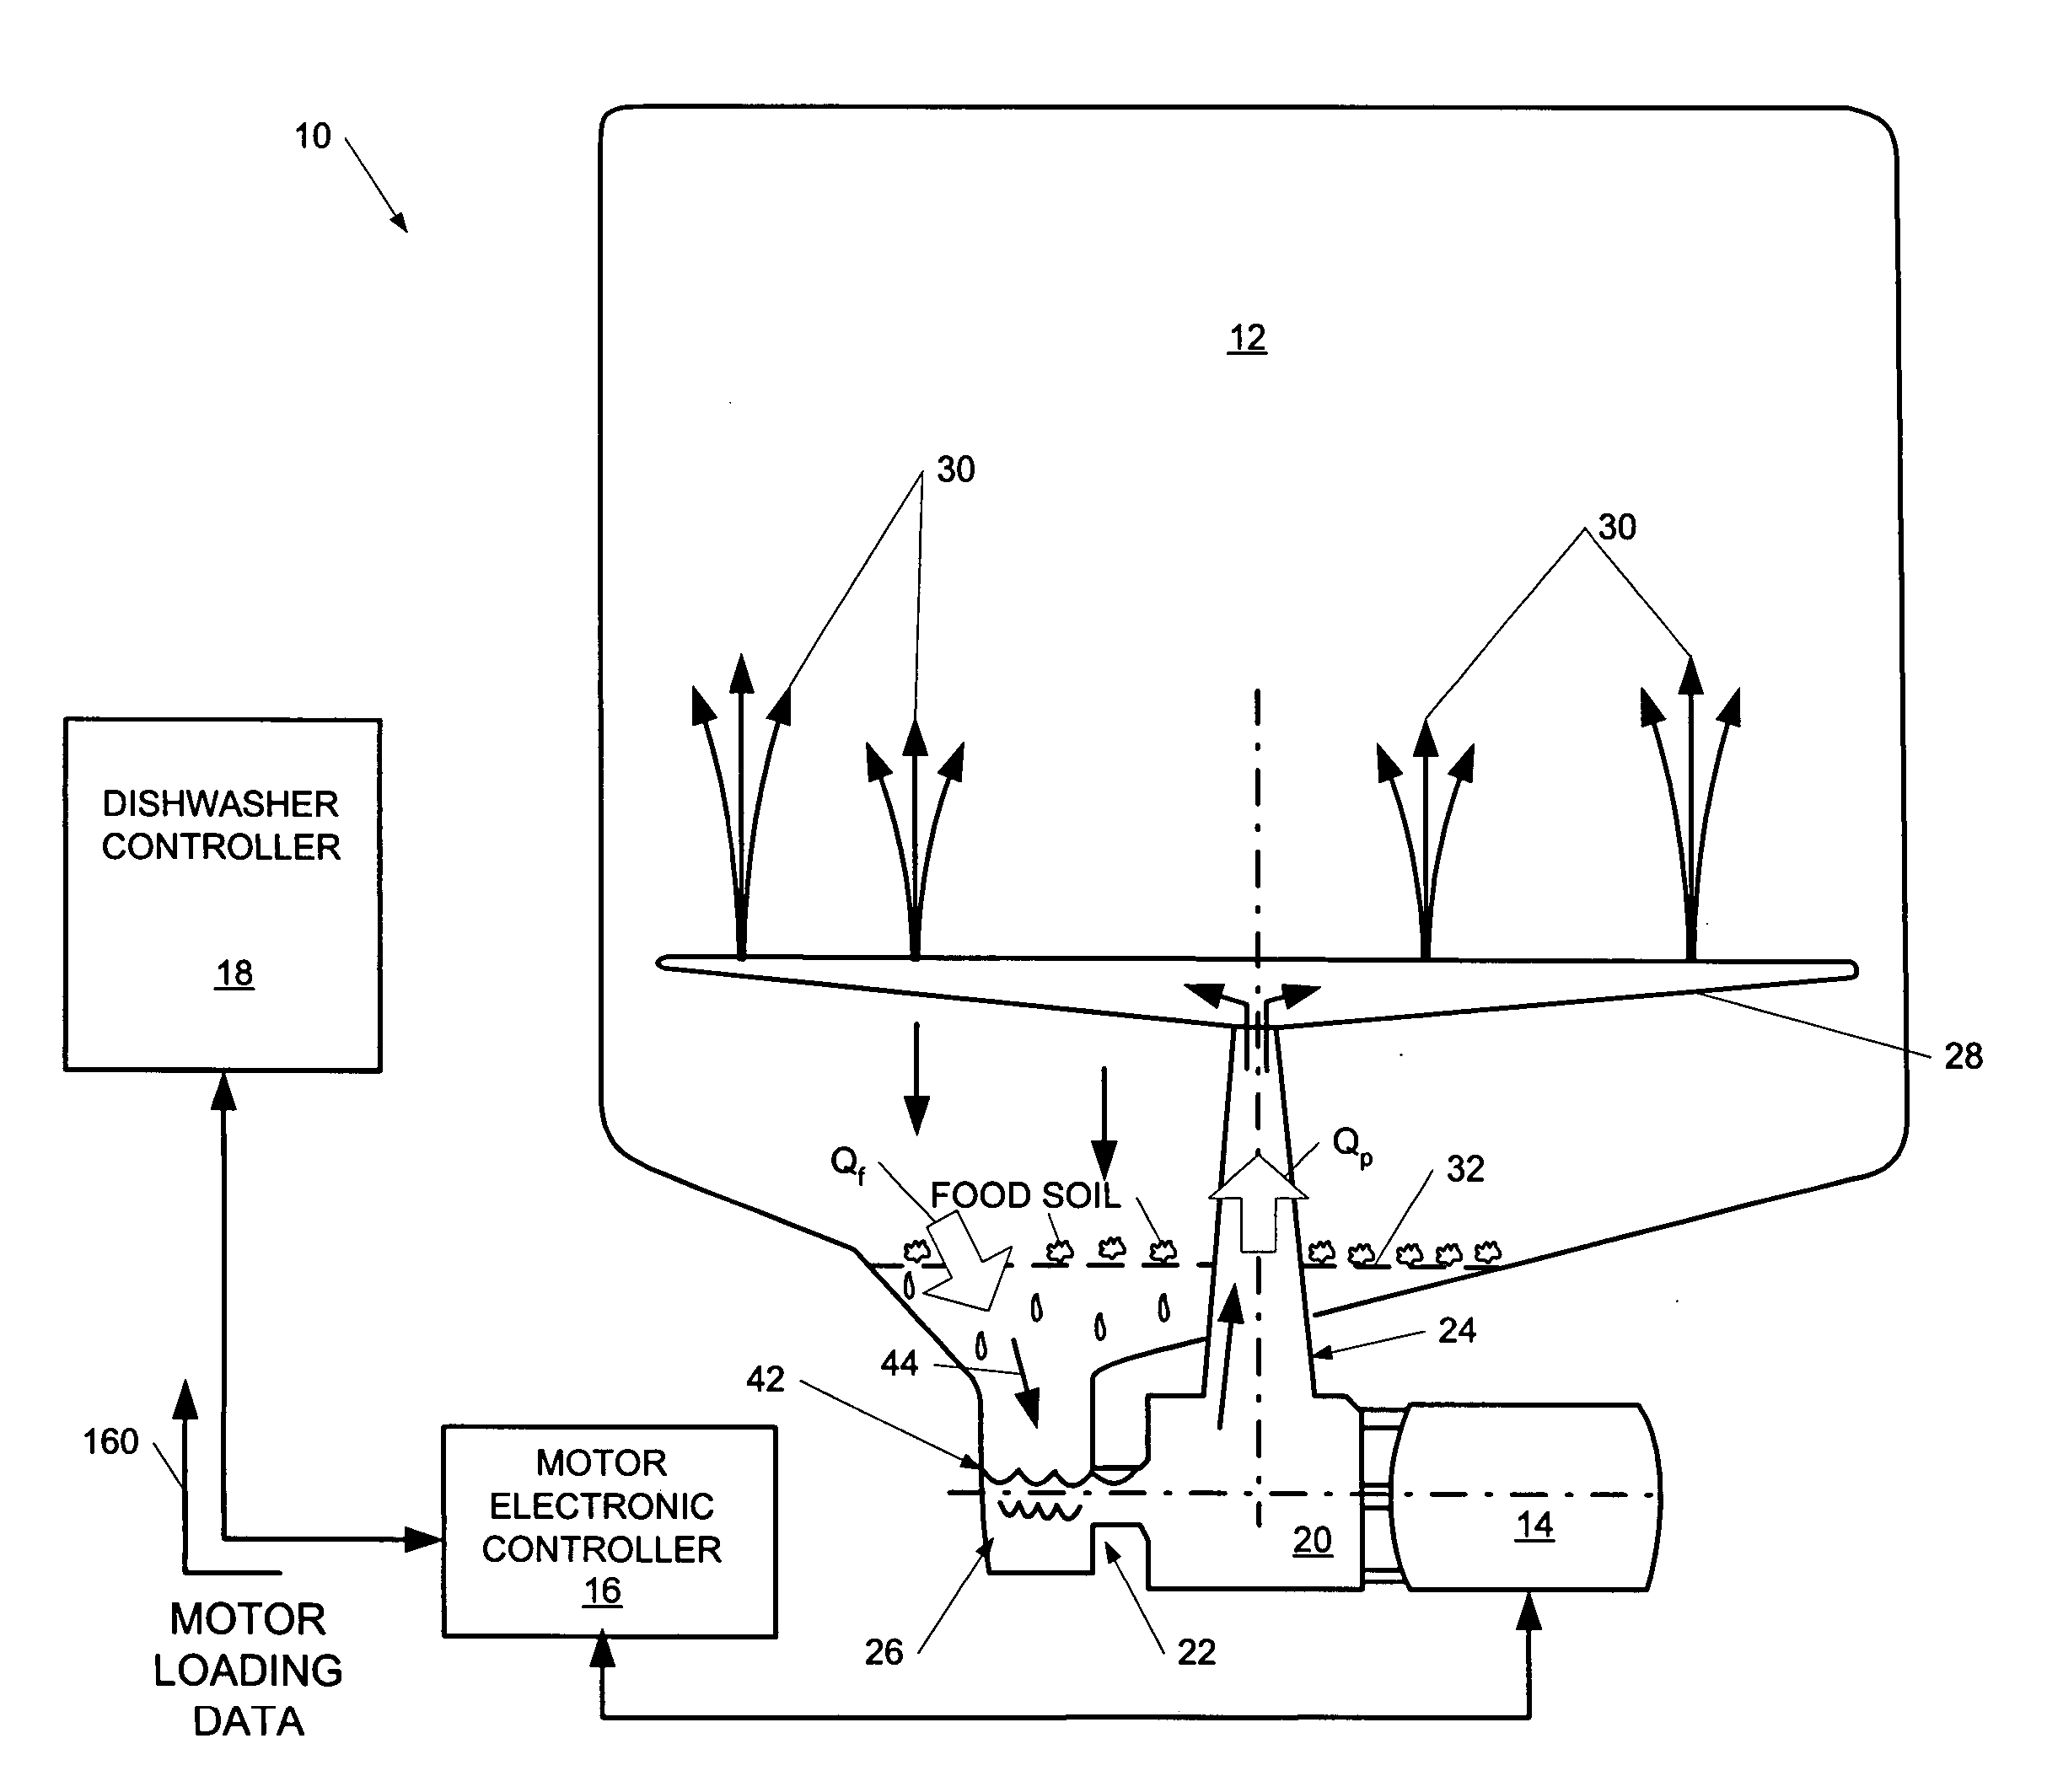 Computer-controlled system for dishwashers